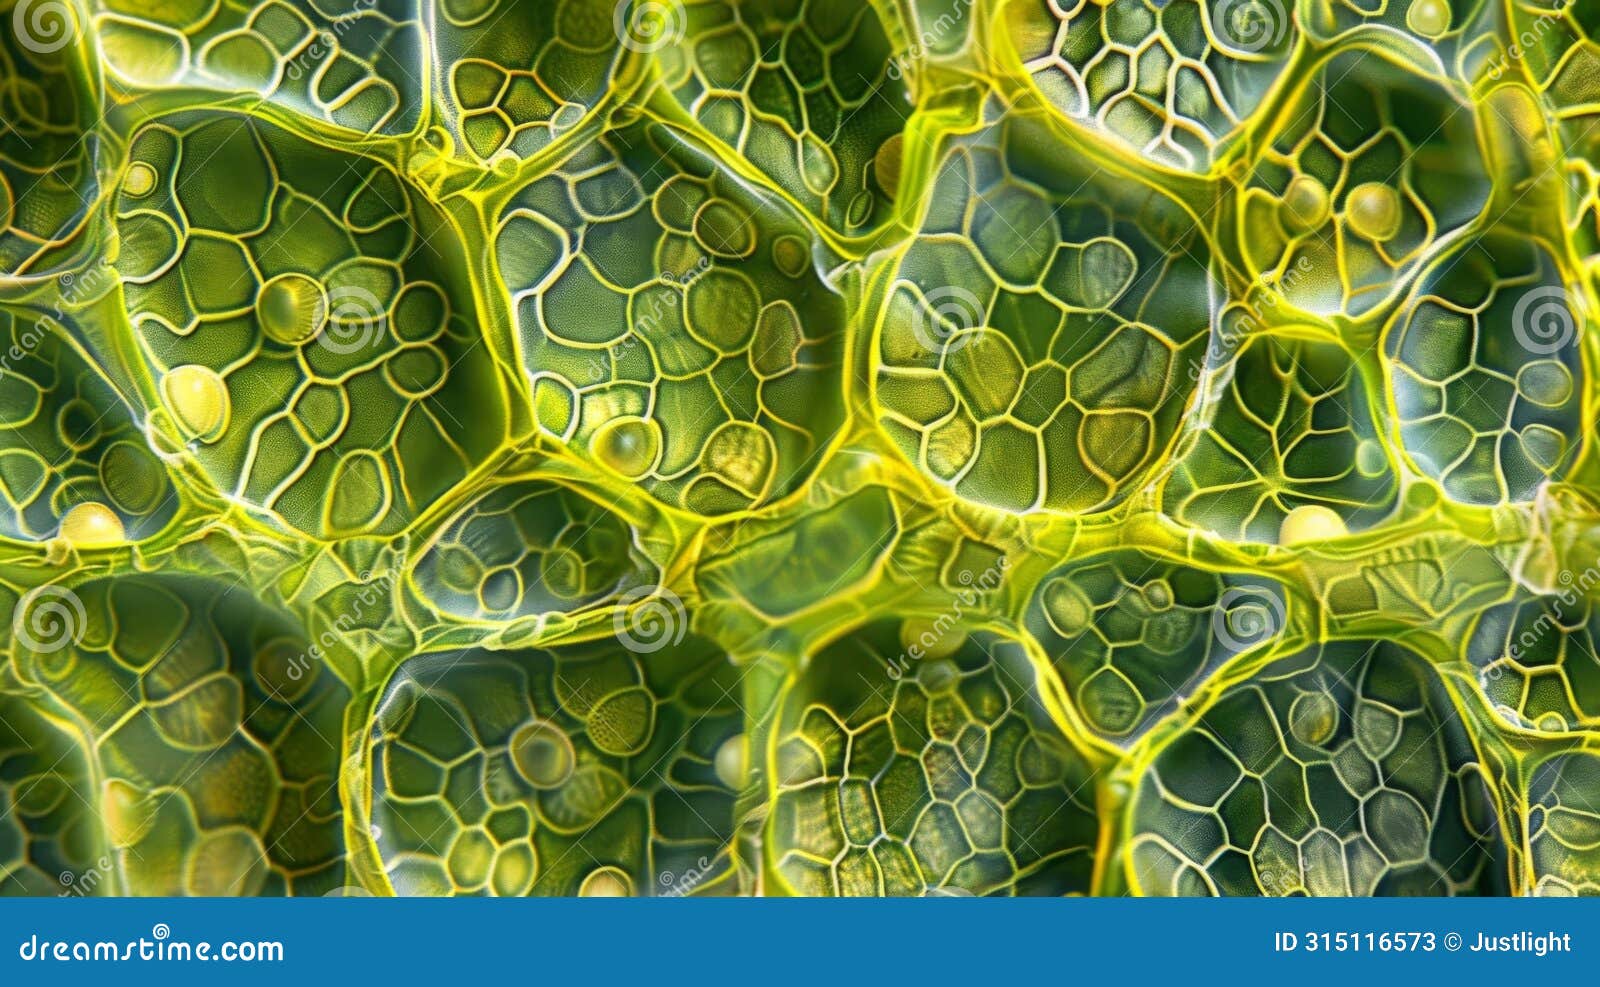 a highly magnified view of a plant cells chloroplasts revealing the precise arrangement of thylakoid membranes and